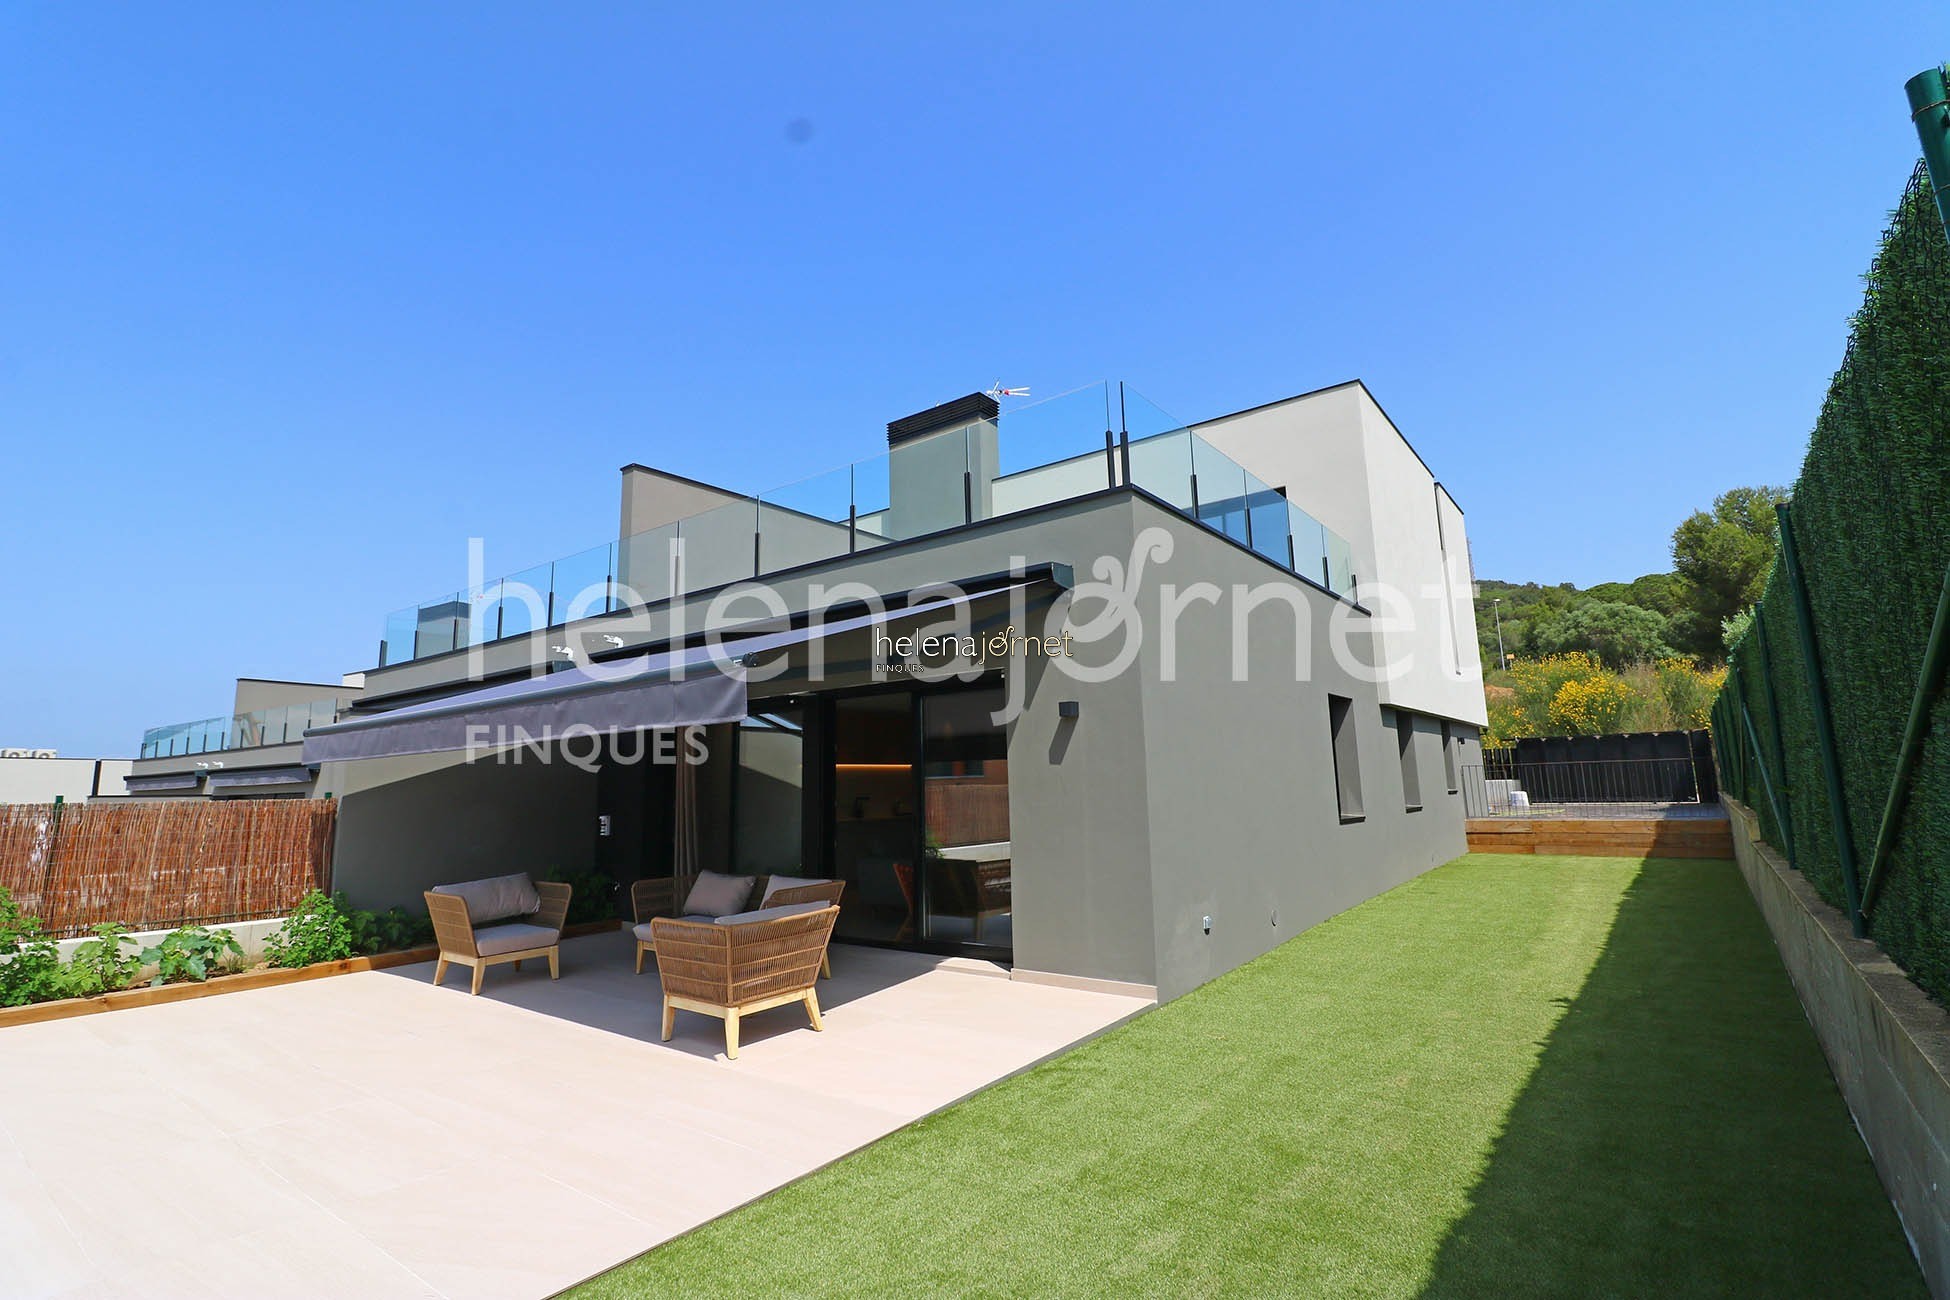 Spectacular newly built house with 4 bedrooms, magnificent finishes and private swimming pool in Santa Cristina d'Aro - 70155 - Mas Pla VI